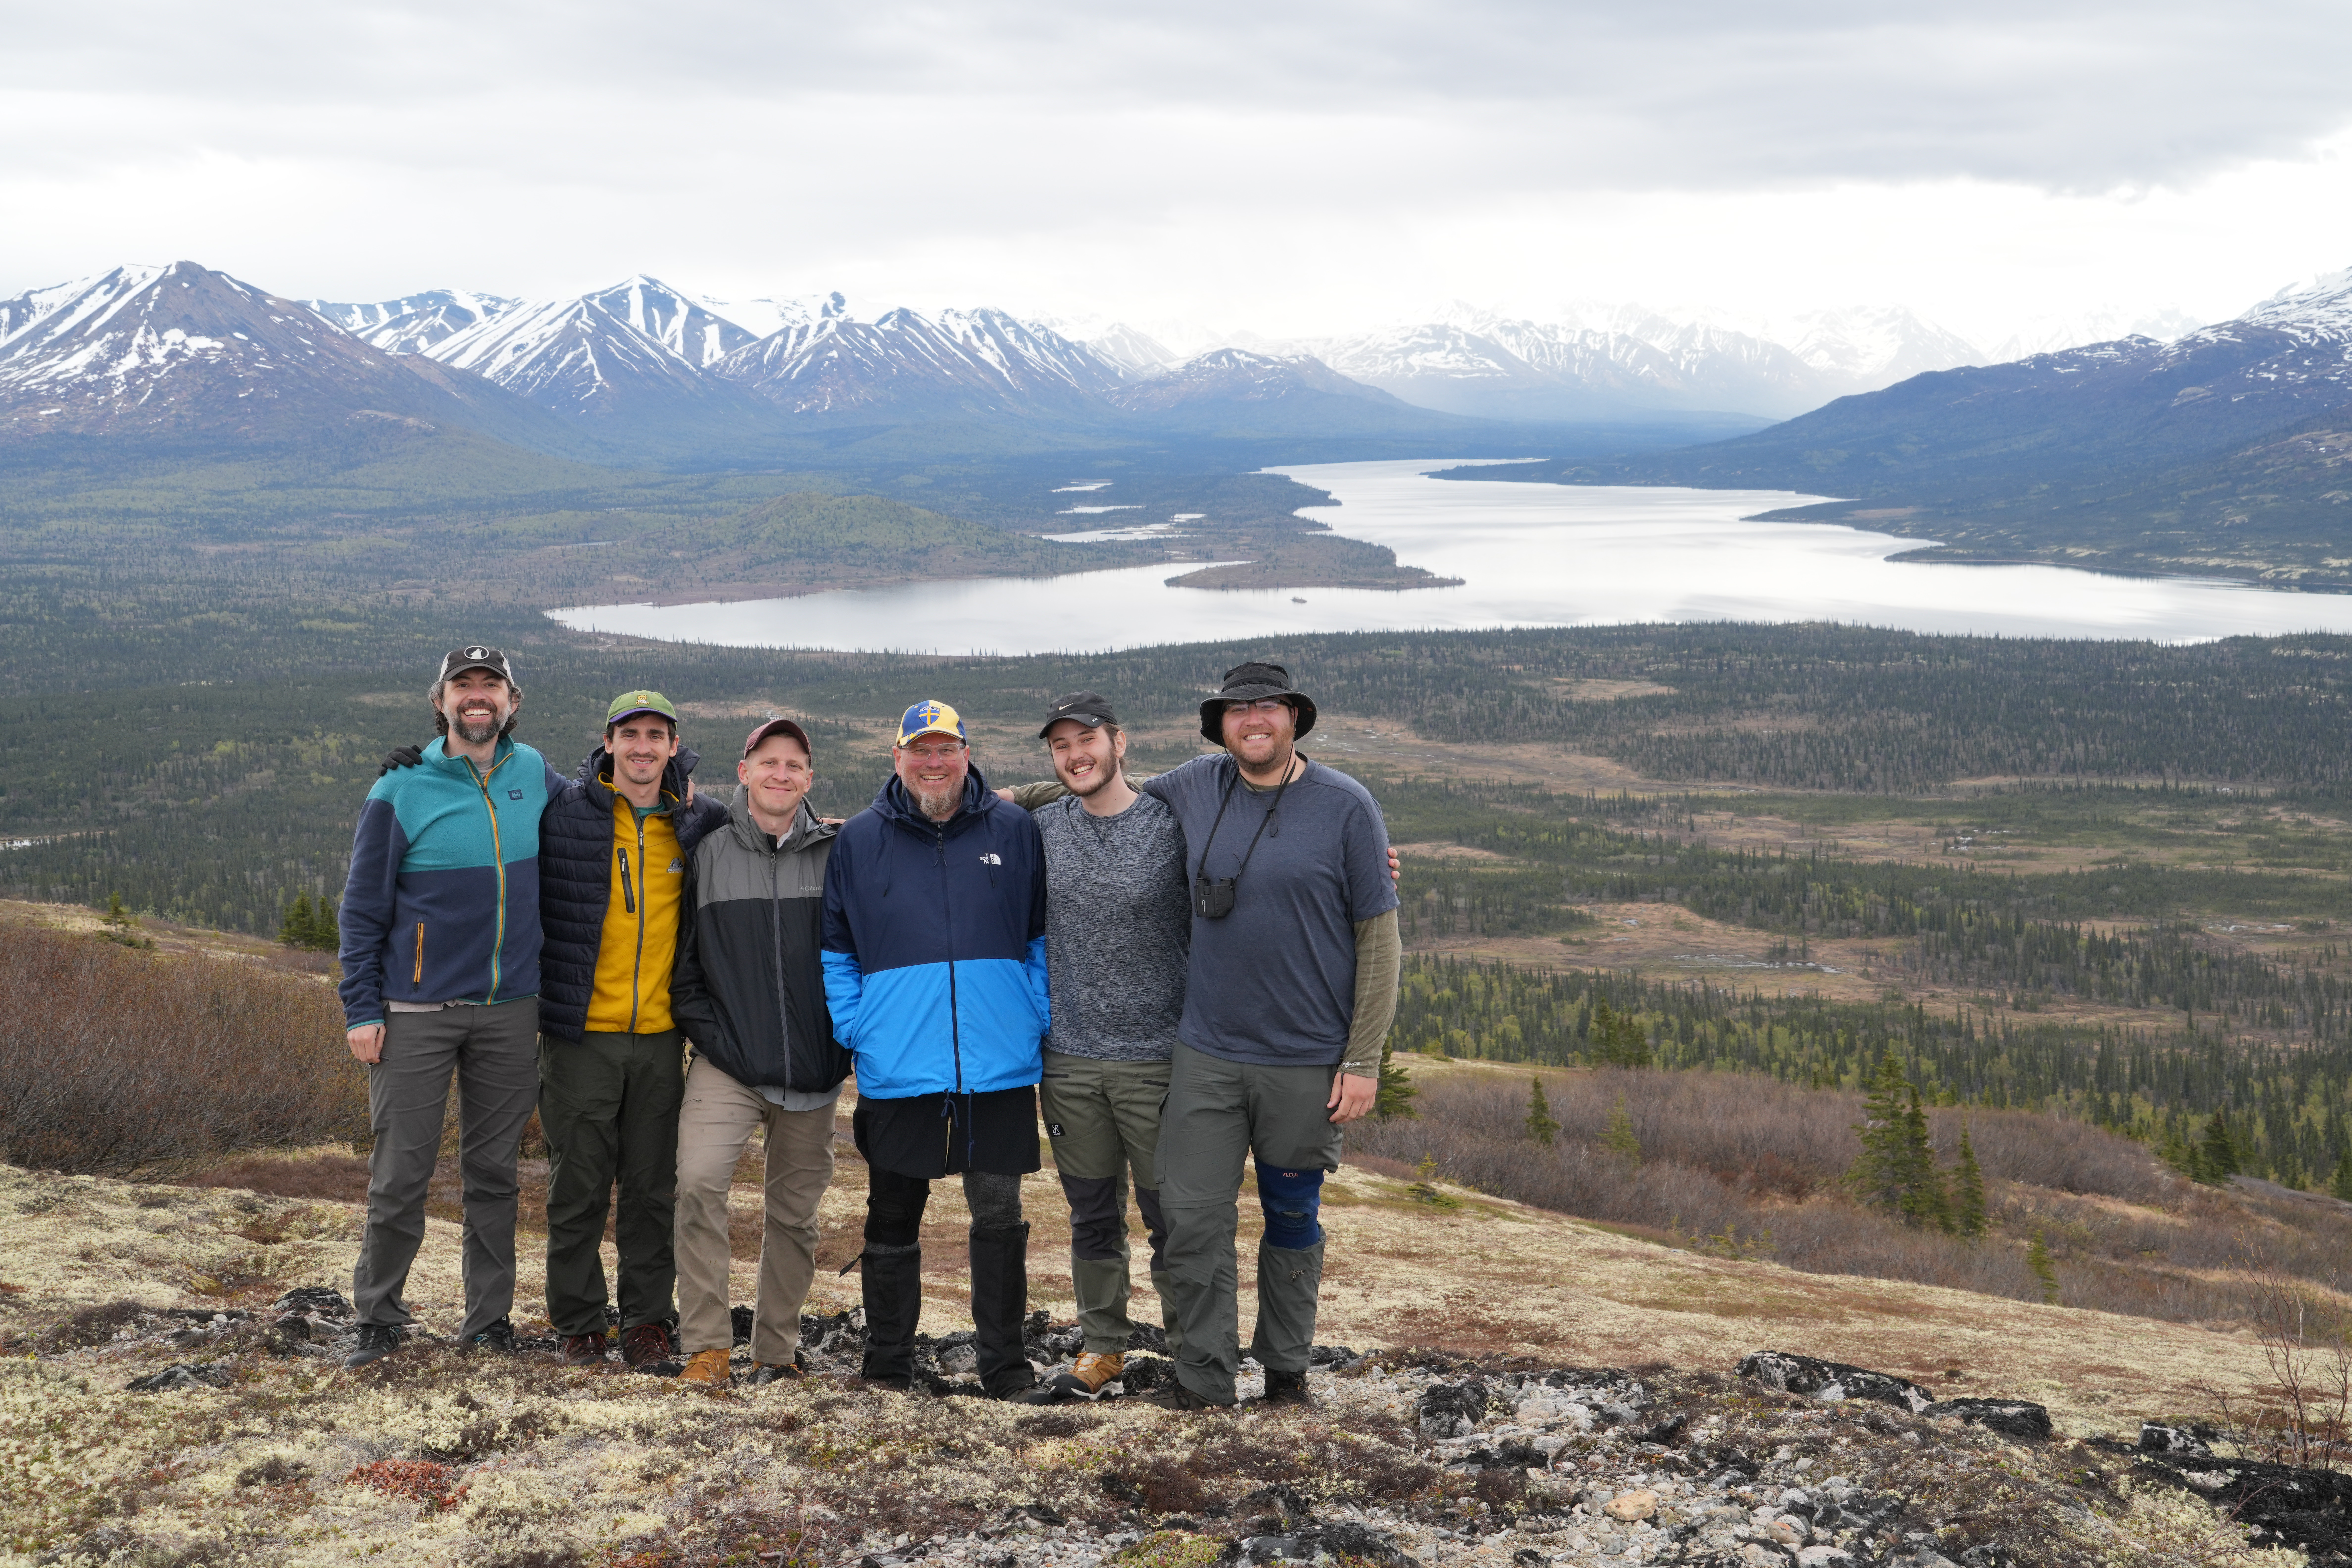 Left to right: Jason Carl Rosenberg, Robert Alexander, Kory Reeder, Paul Rudy, Ryan McQuay Meredith and Trevor Frost, who spent 10 days in the backcountry of Lake Clark National Park as part of the “Composing in the Wilderness” program. Courtesy photo.